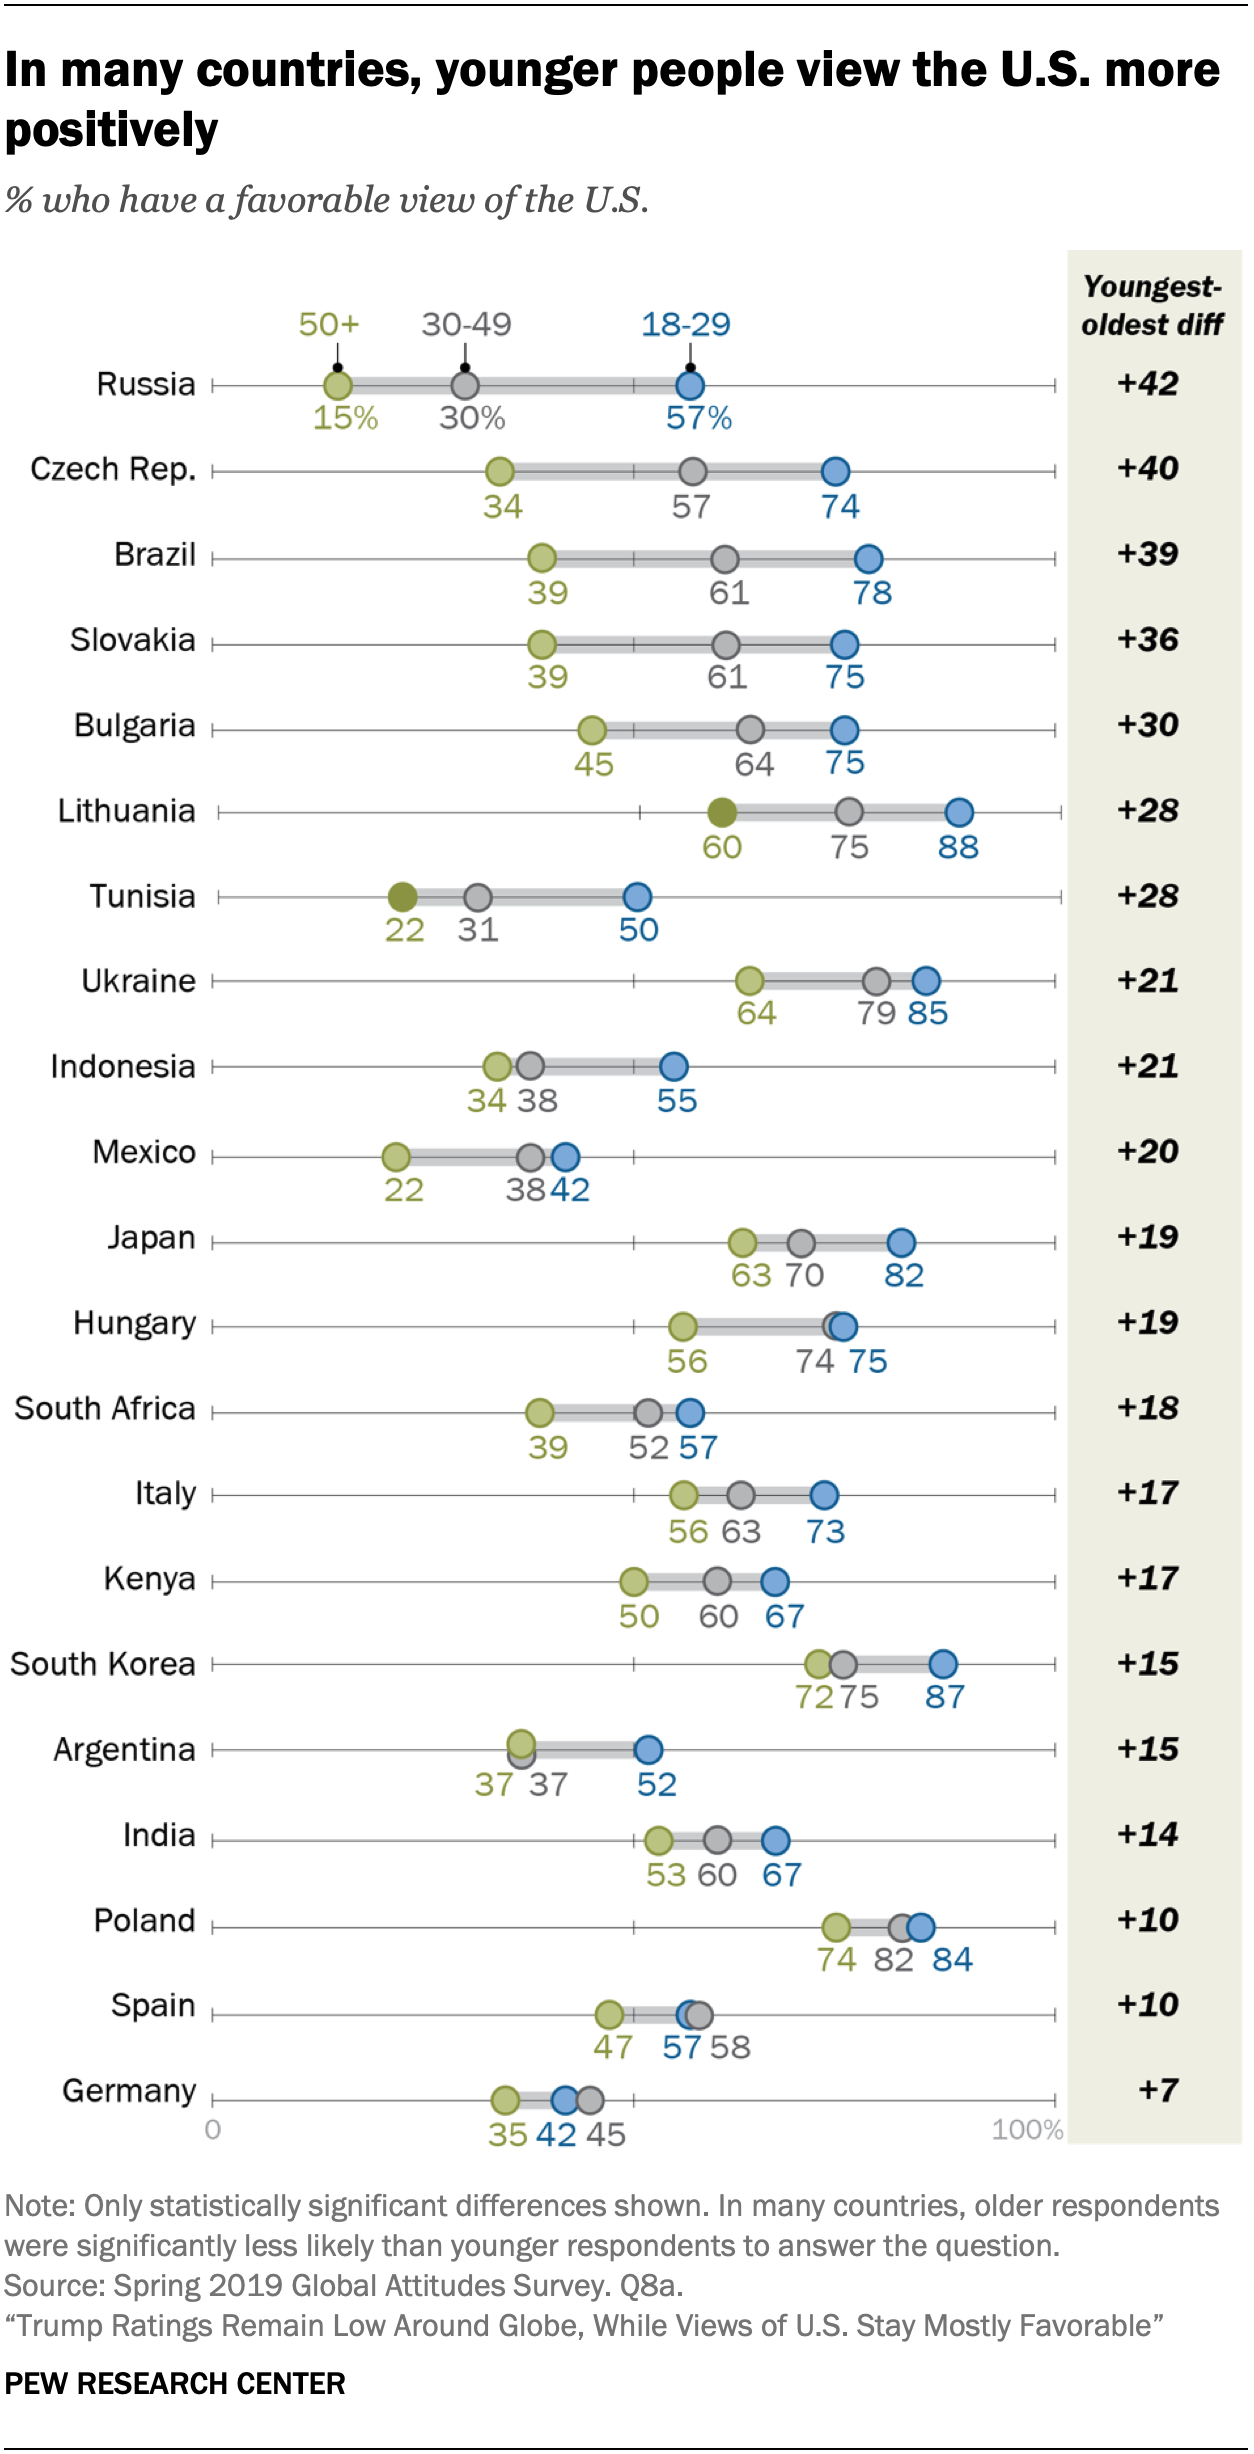 In many countries, younger people view the U.S. more positively